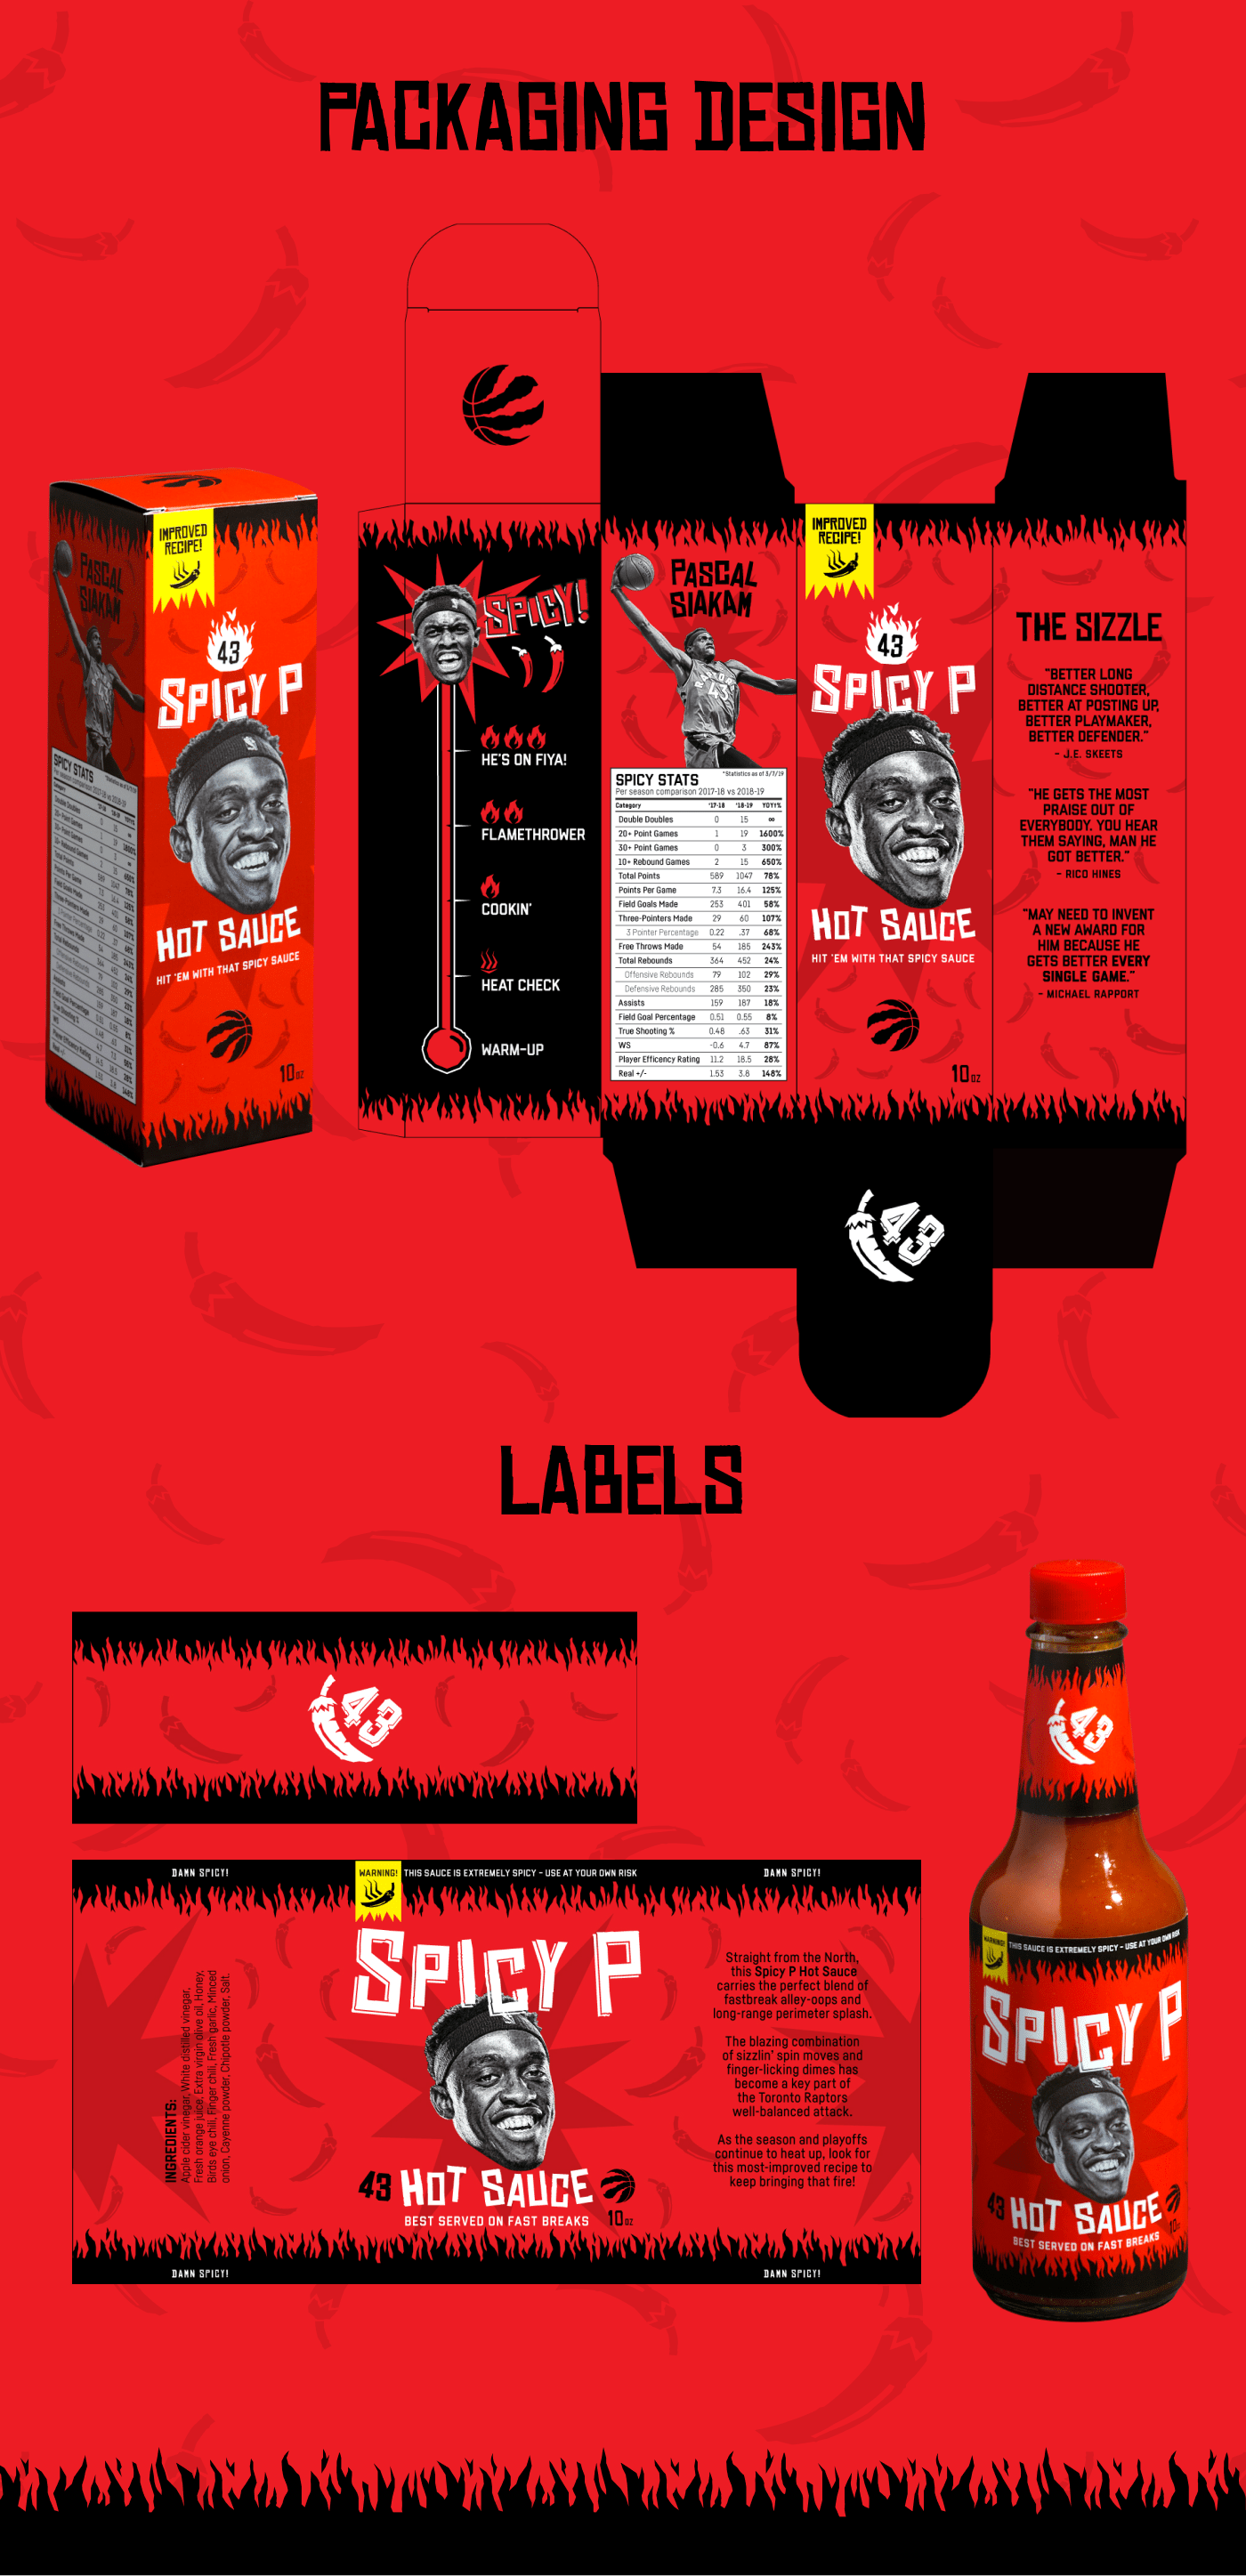 basketball hot sauce most improved player NBA pascal siakam Promotion spicy p Sports Design Toronto Raptors we the north